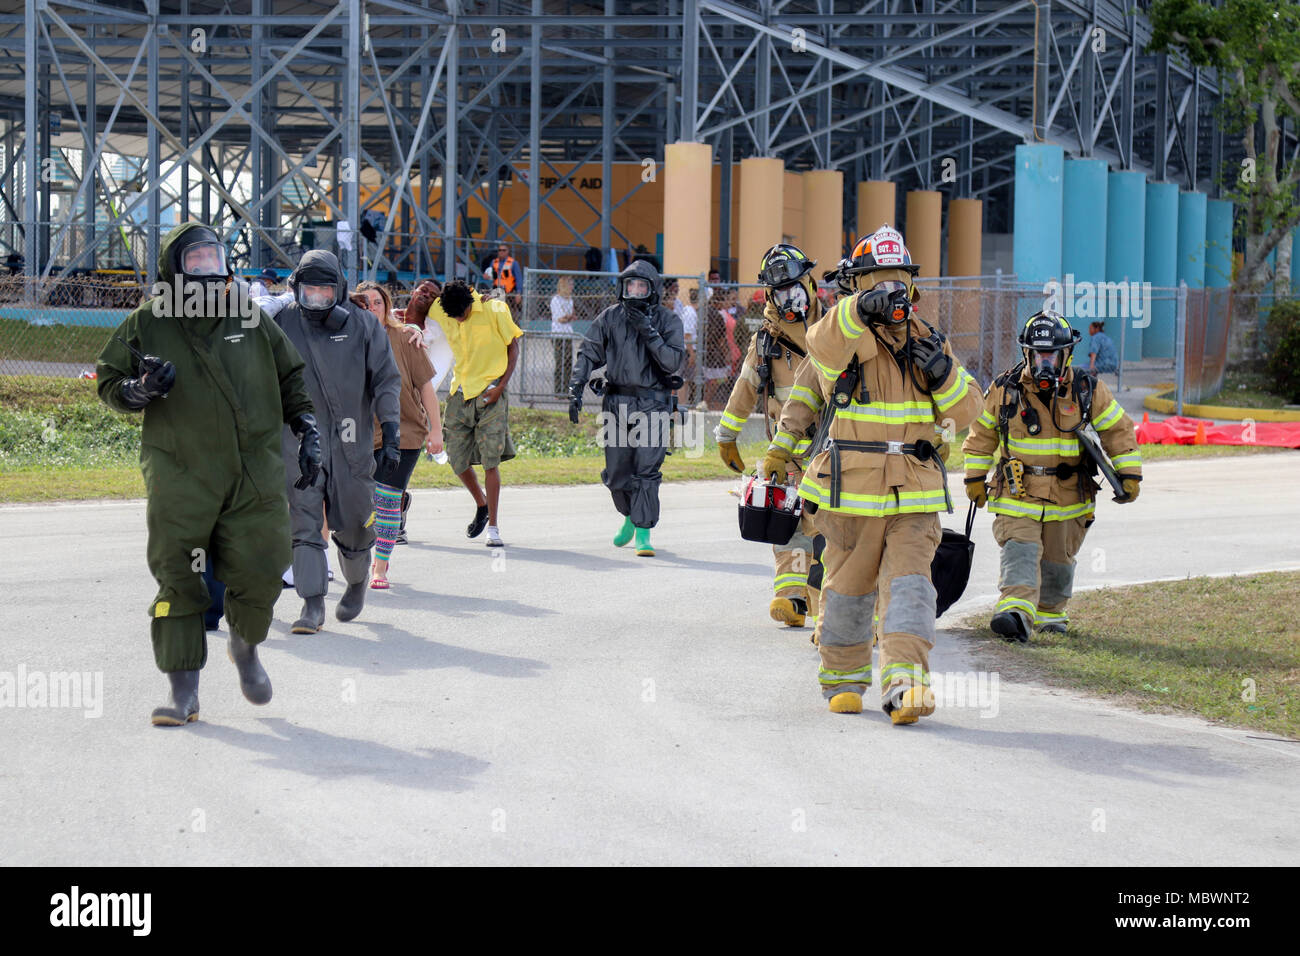 Soldiers of the 414th Chemical Company from Orangeburg, South Carolina and members of the Miami-Dade Fire Department Hazmat team, guide simulated casualties towards a simulated mass casualty decontamination zone during a Joint Training Exercise hosted by the Homestead-Miami Speedway and Miami-Dade Fire Department in Miami, Florida. Jan. 11, 2018. This JTE focused on building response capabilities and the seamless transition between the local first responders and the follow-on support provided by the National Guard and Active duty soldiers. (U. S. Army Photo by Spc. Samuel Brooks) Stock Photo